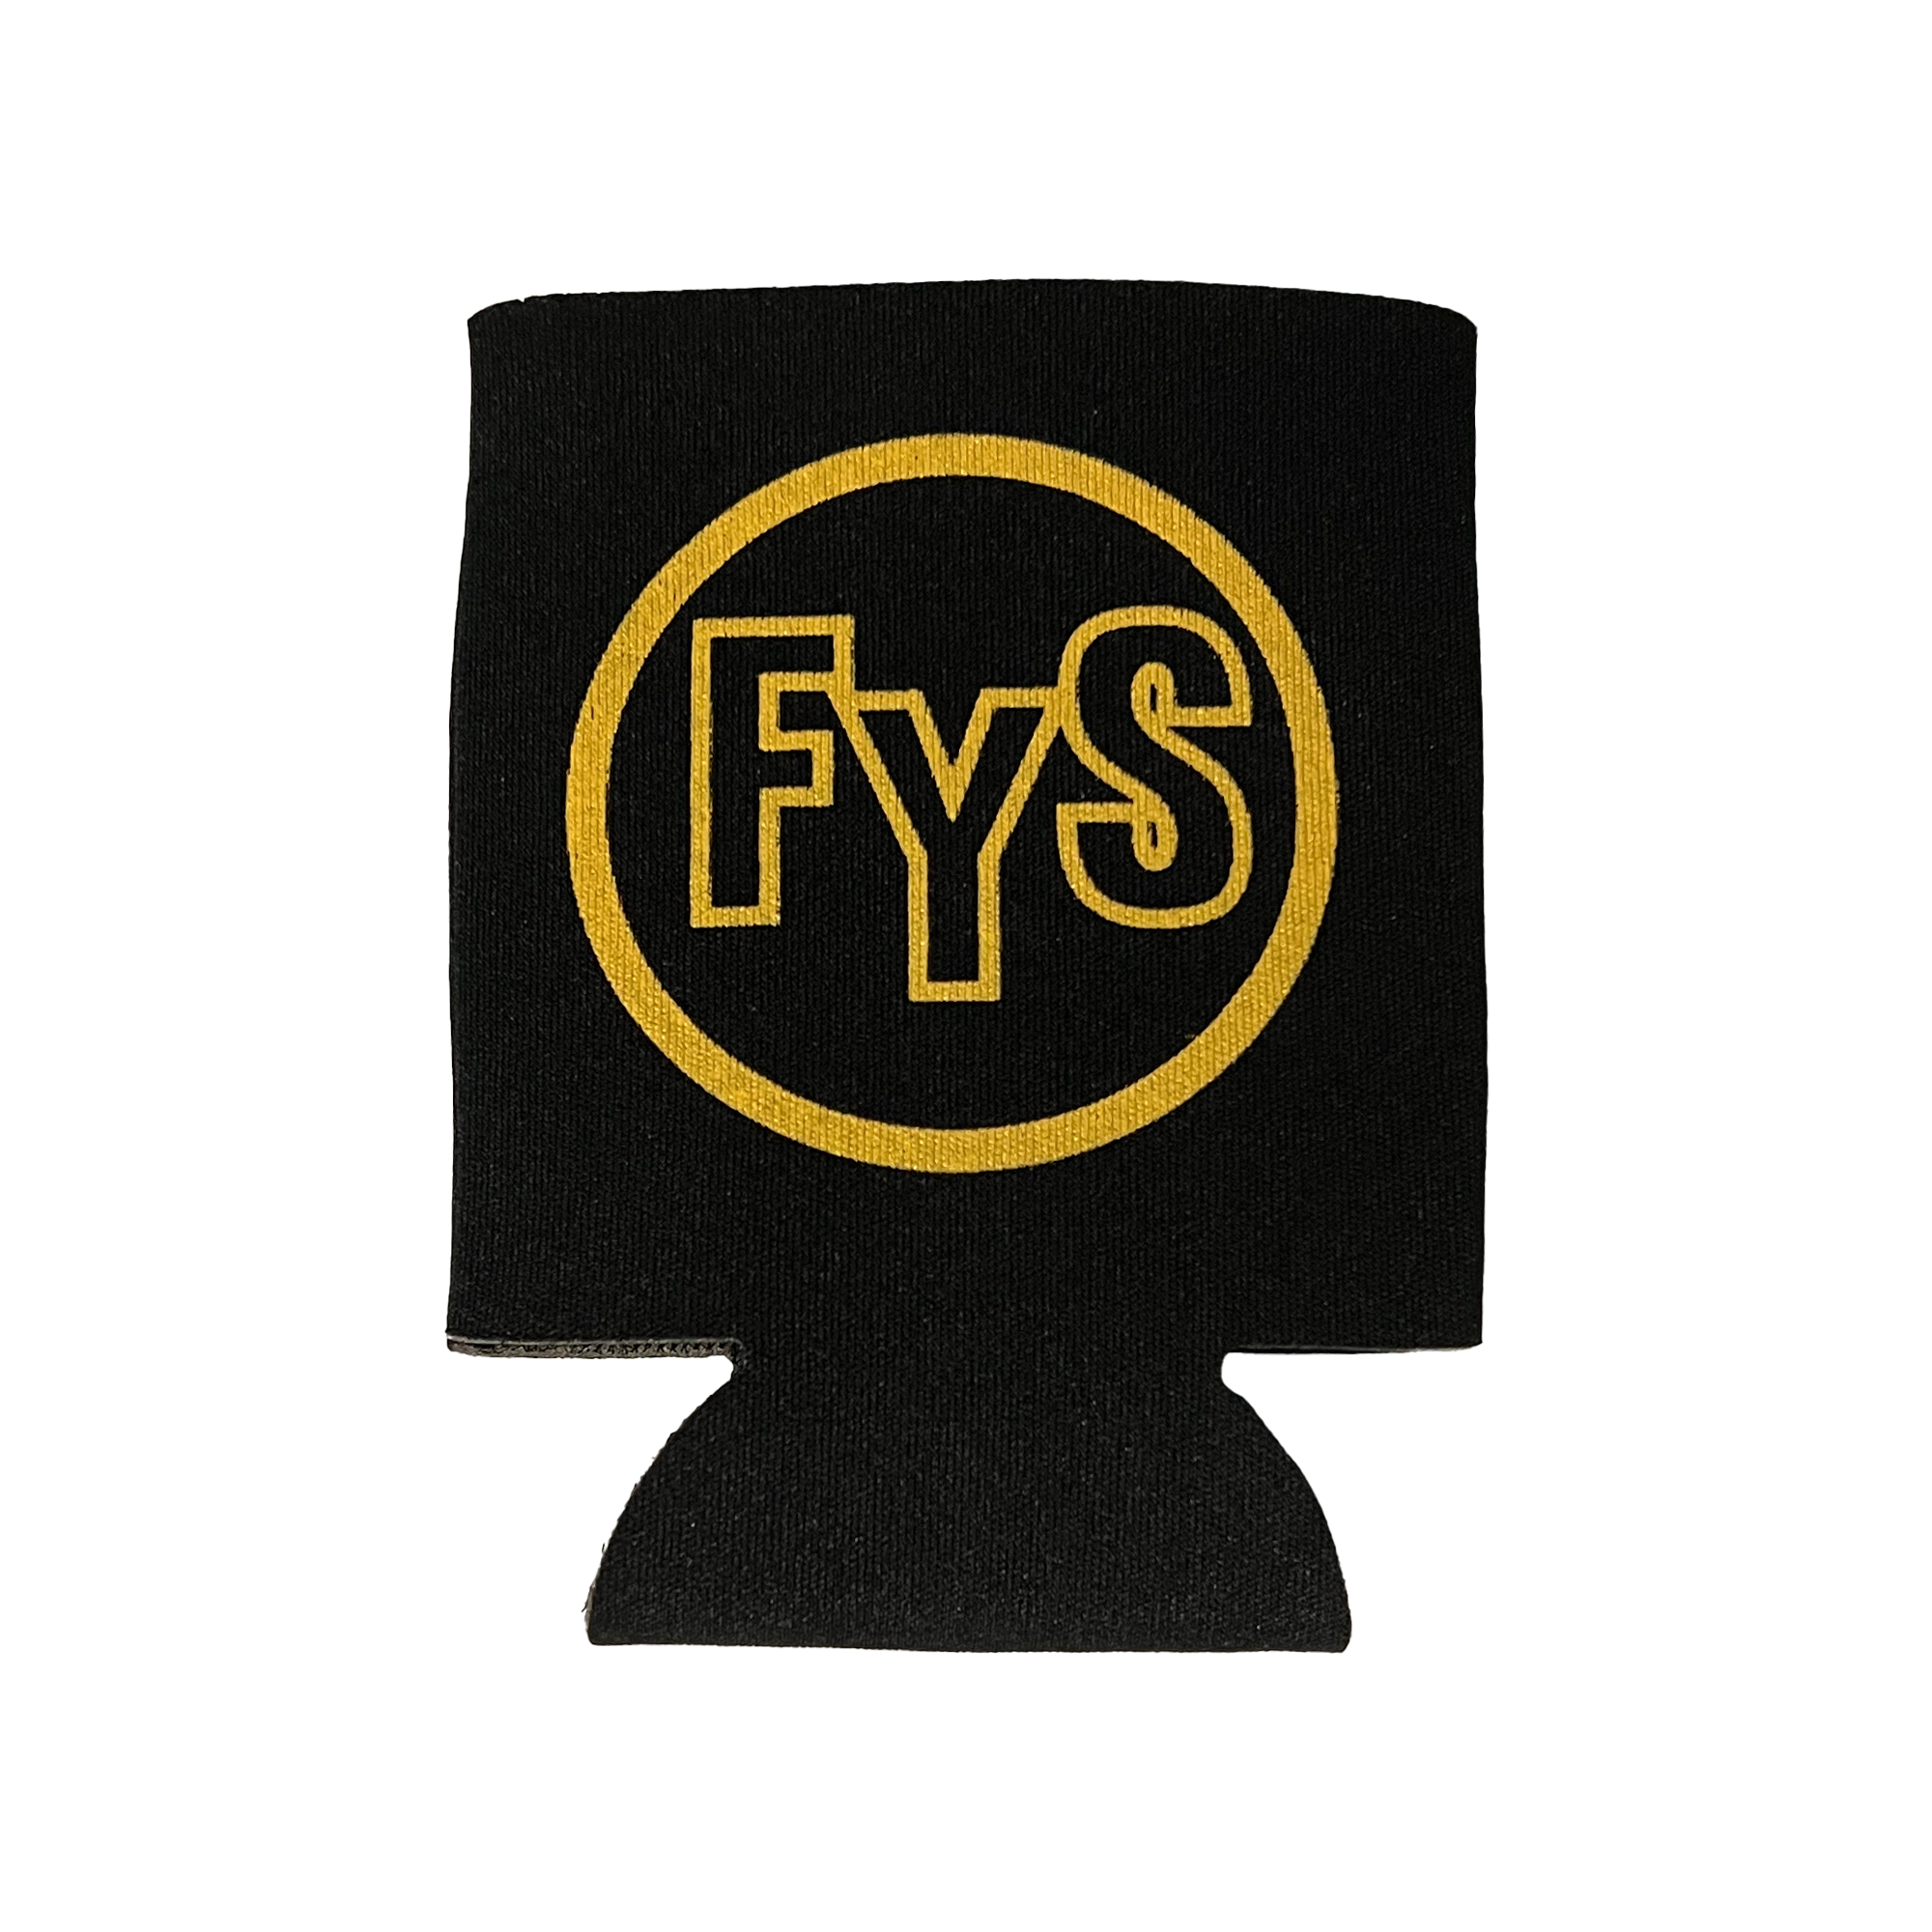 Four Year Strong - Koozie